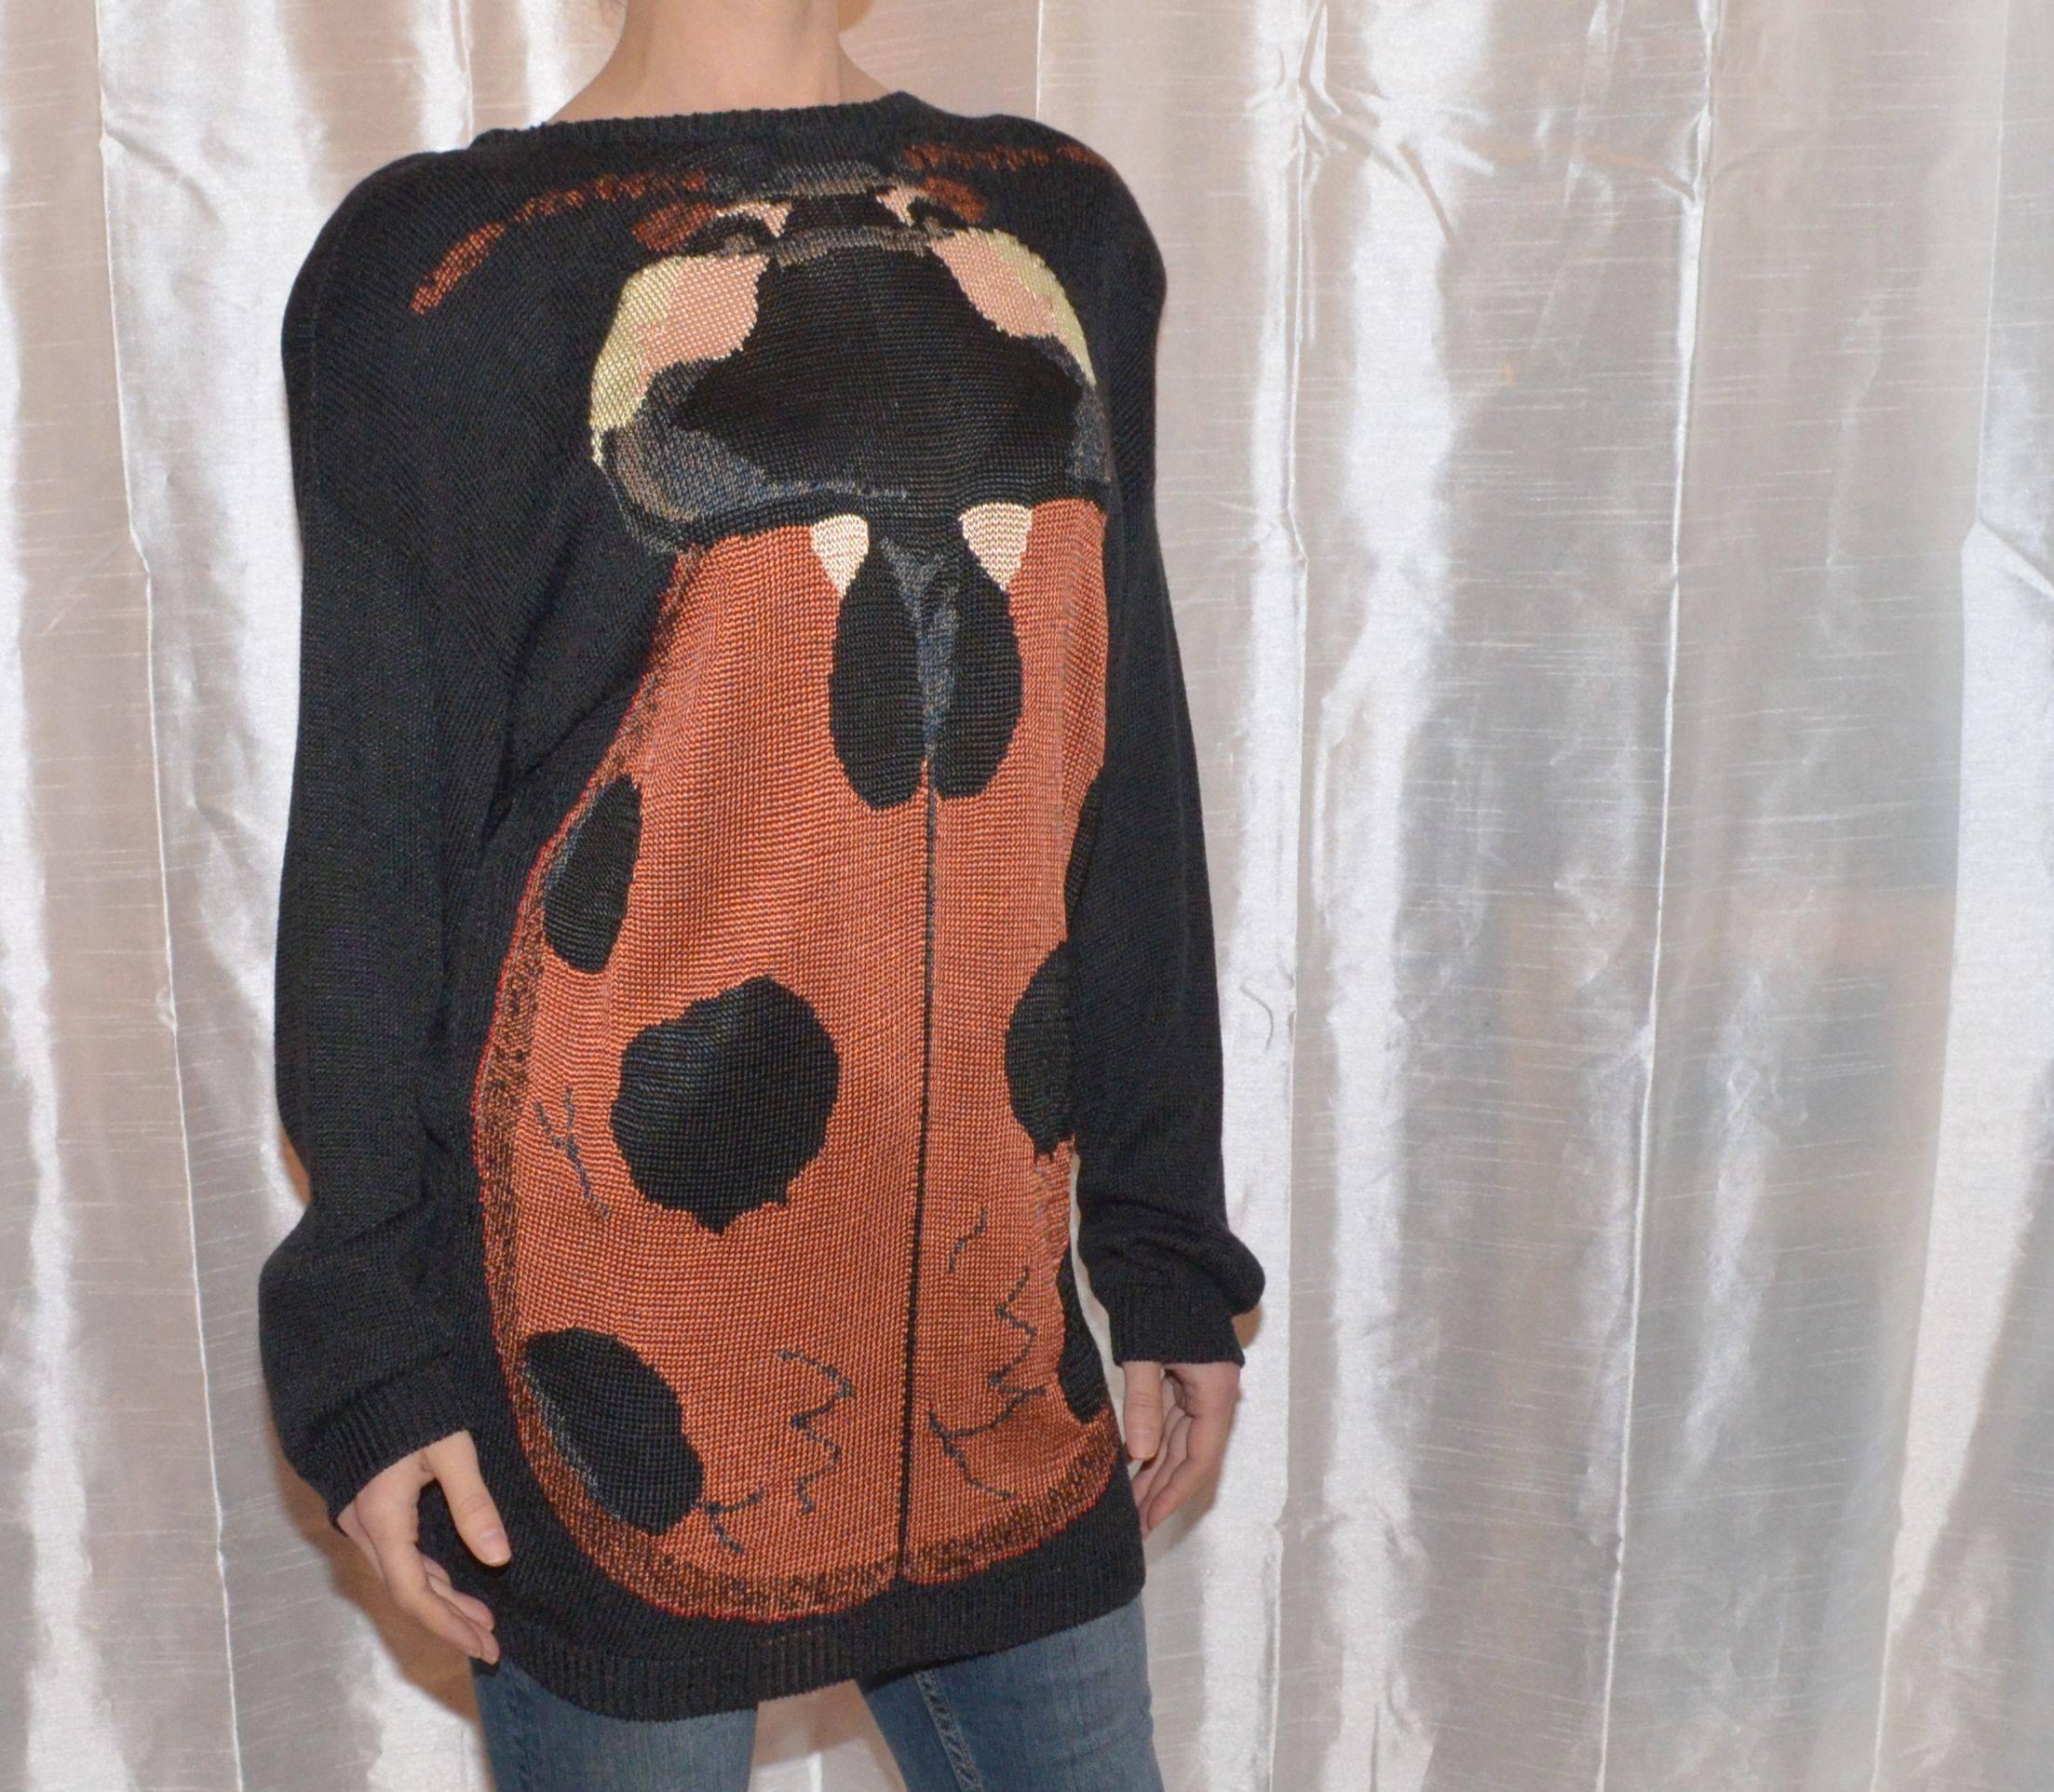 Krizia vintage sweater in a knitted rayon fabric with a large ladybug on the front. Sweater is labeled a size 42 and is made in Italy.

Measurements:
Bust - 42''
Sleeves - 21.5''
Shoulders - 25''
Waist - 38''
Length - 29''